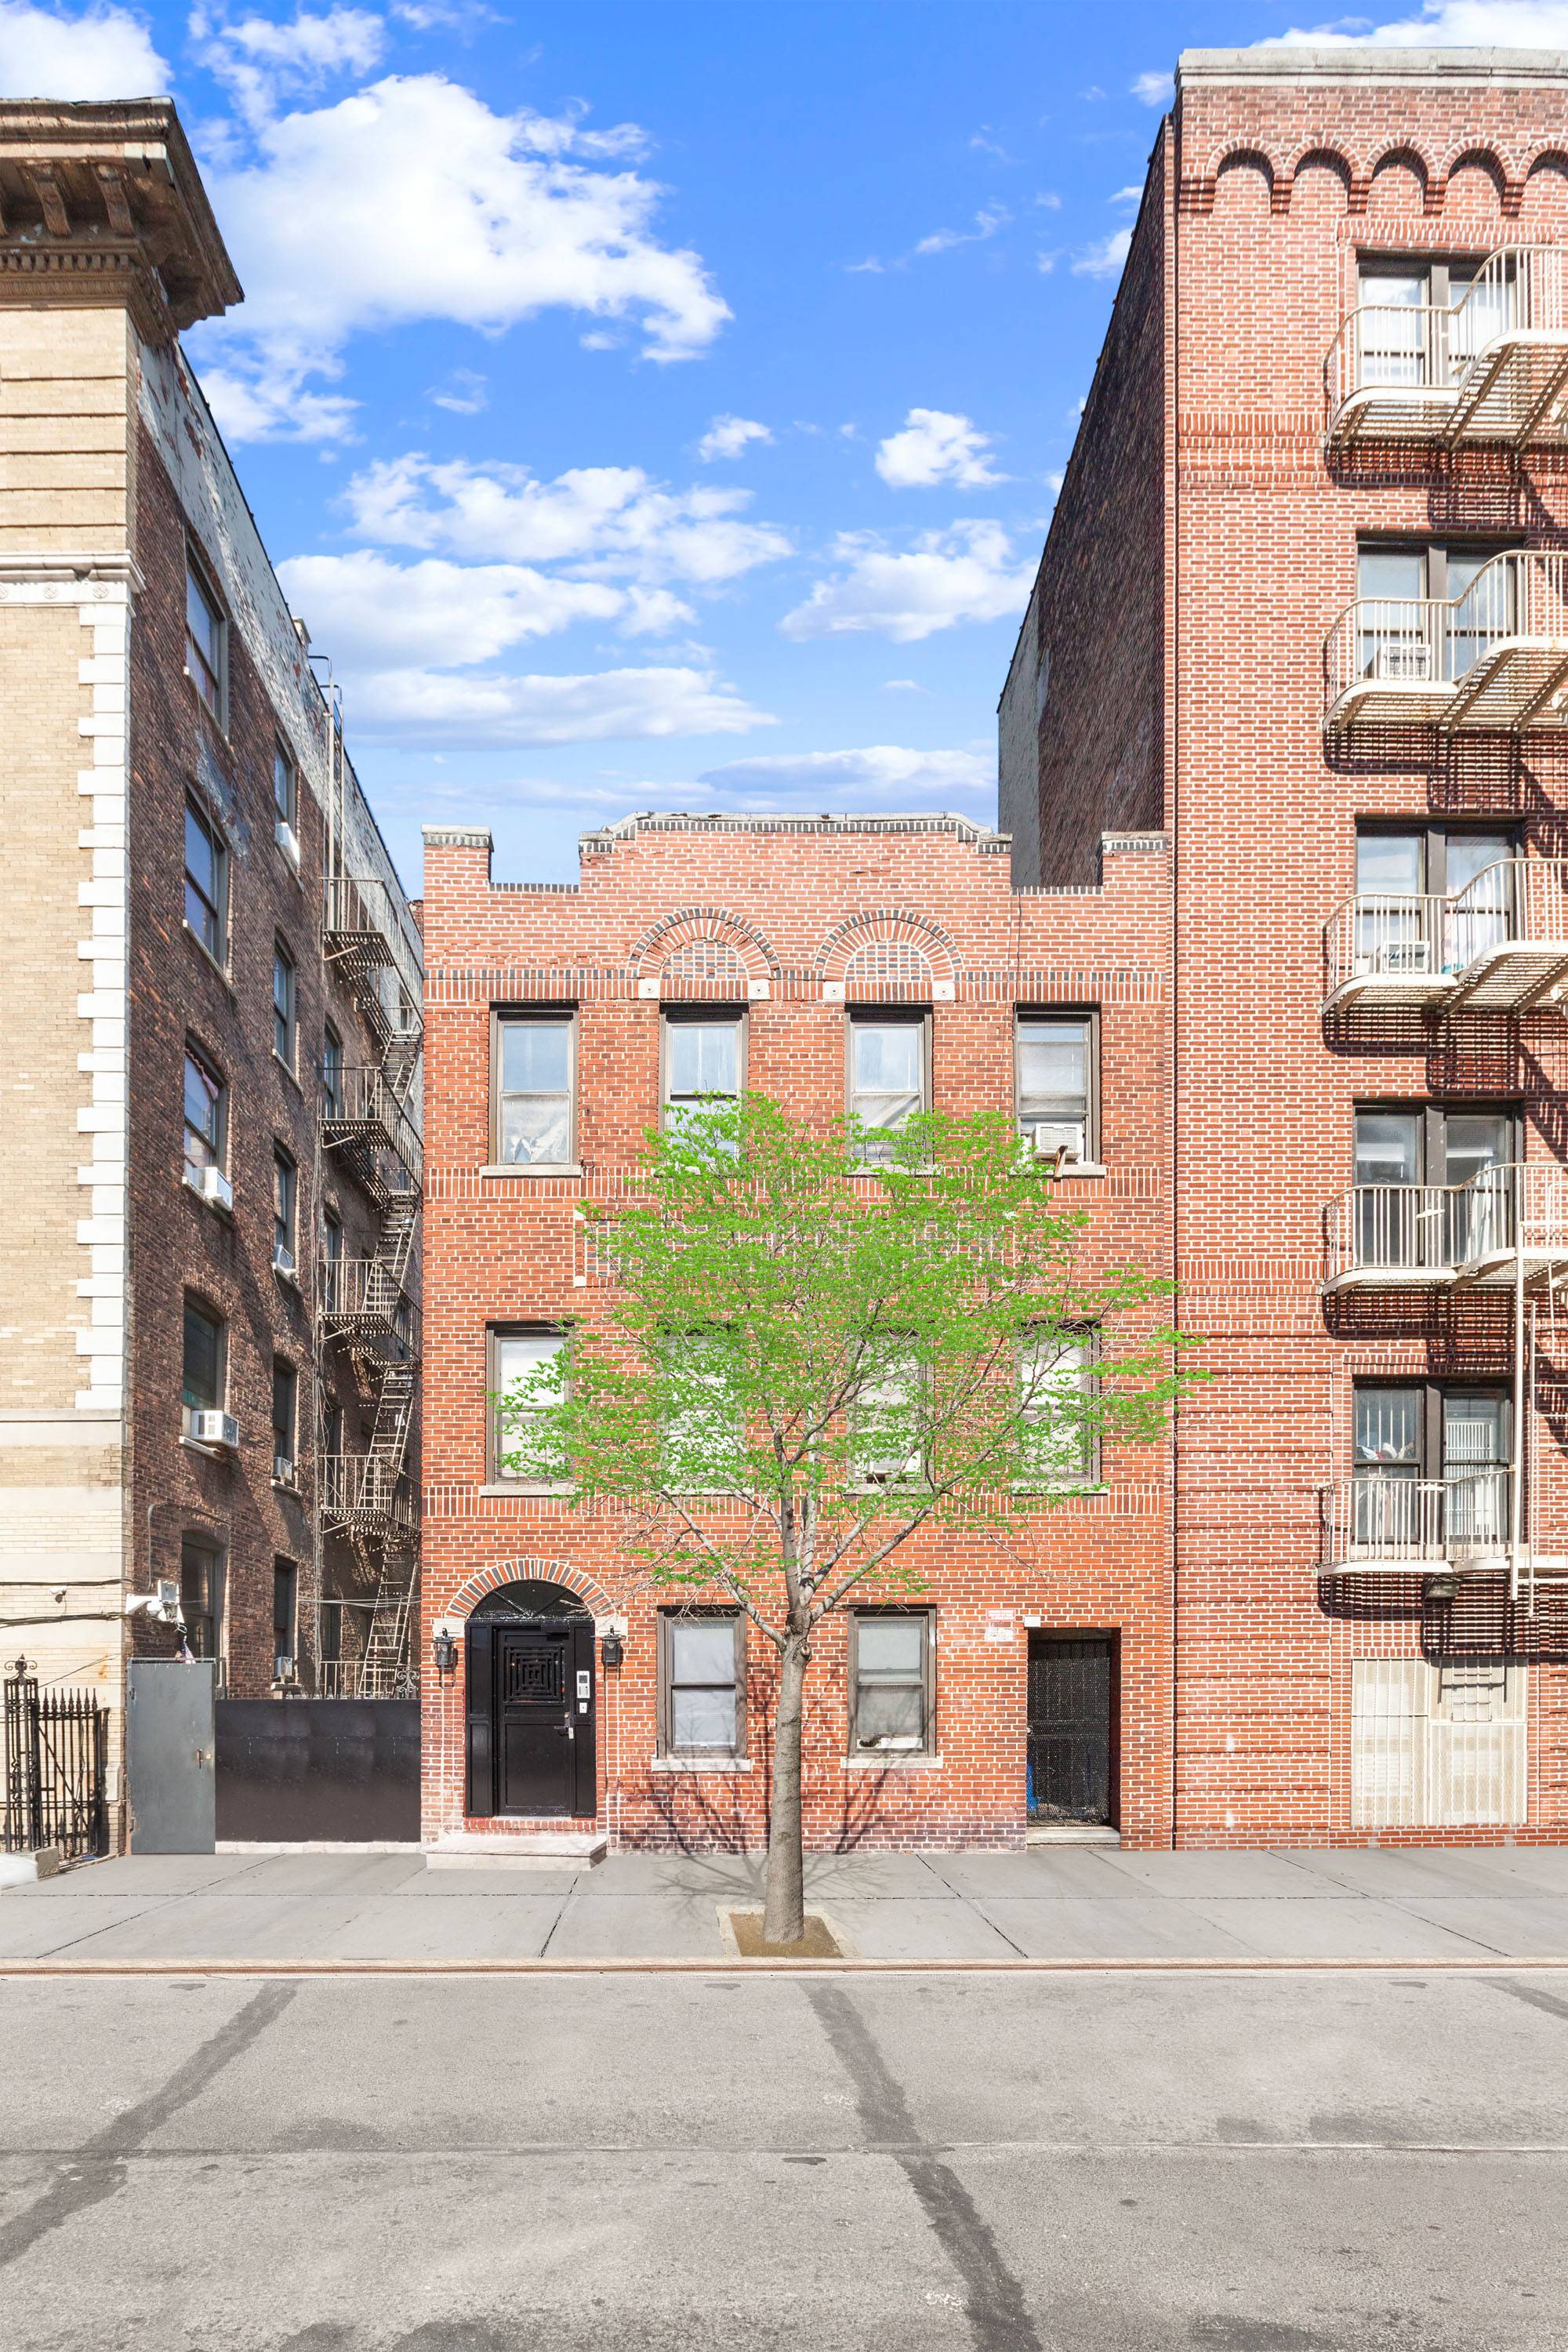 Welcome to 567 W. 184th Street a charming, 25 foot wide, 5 unit gem in the heart of bustling Washington Heights.